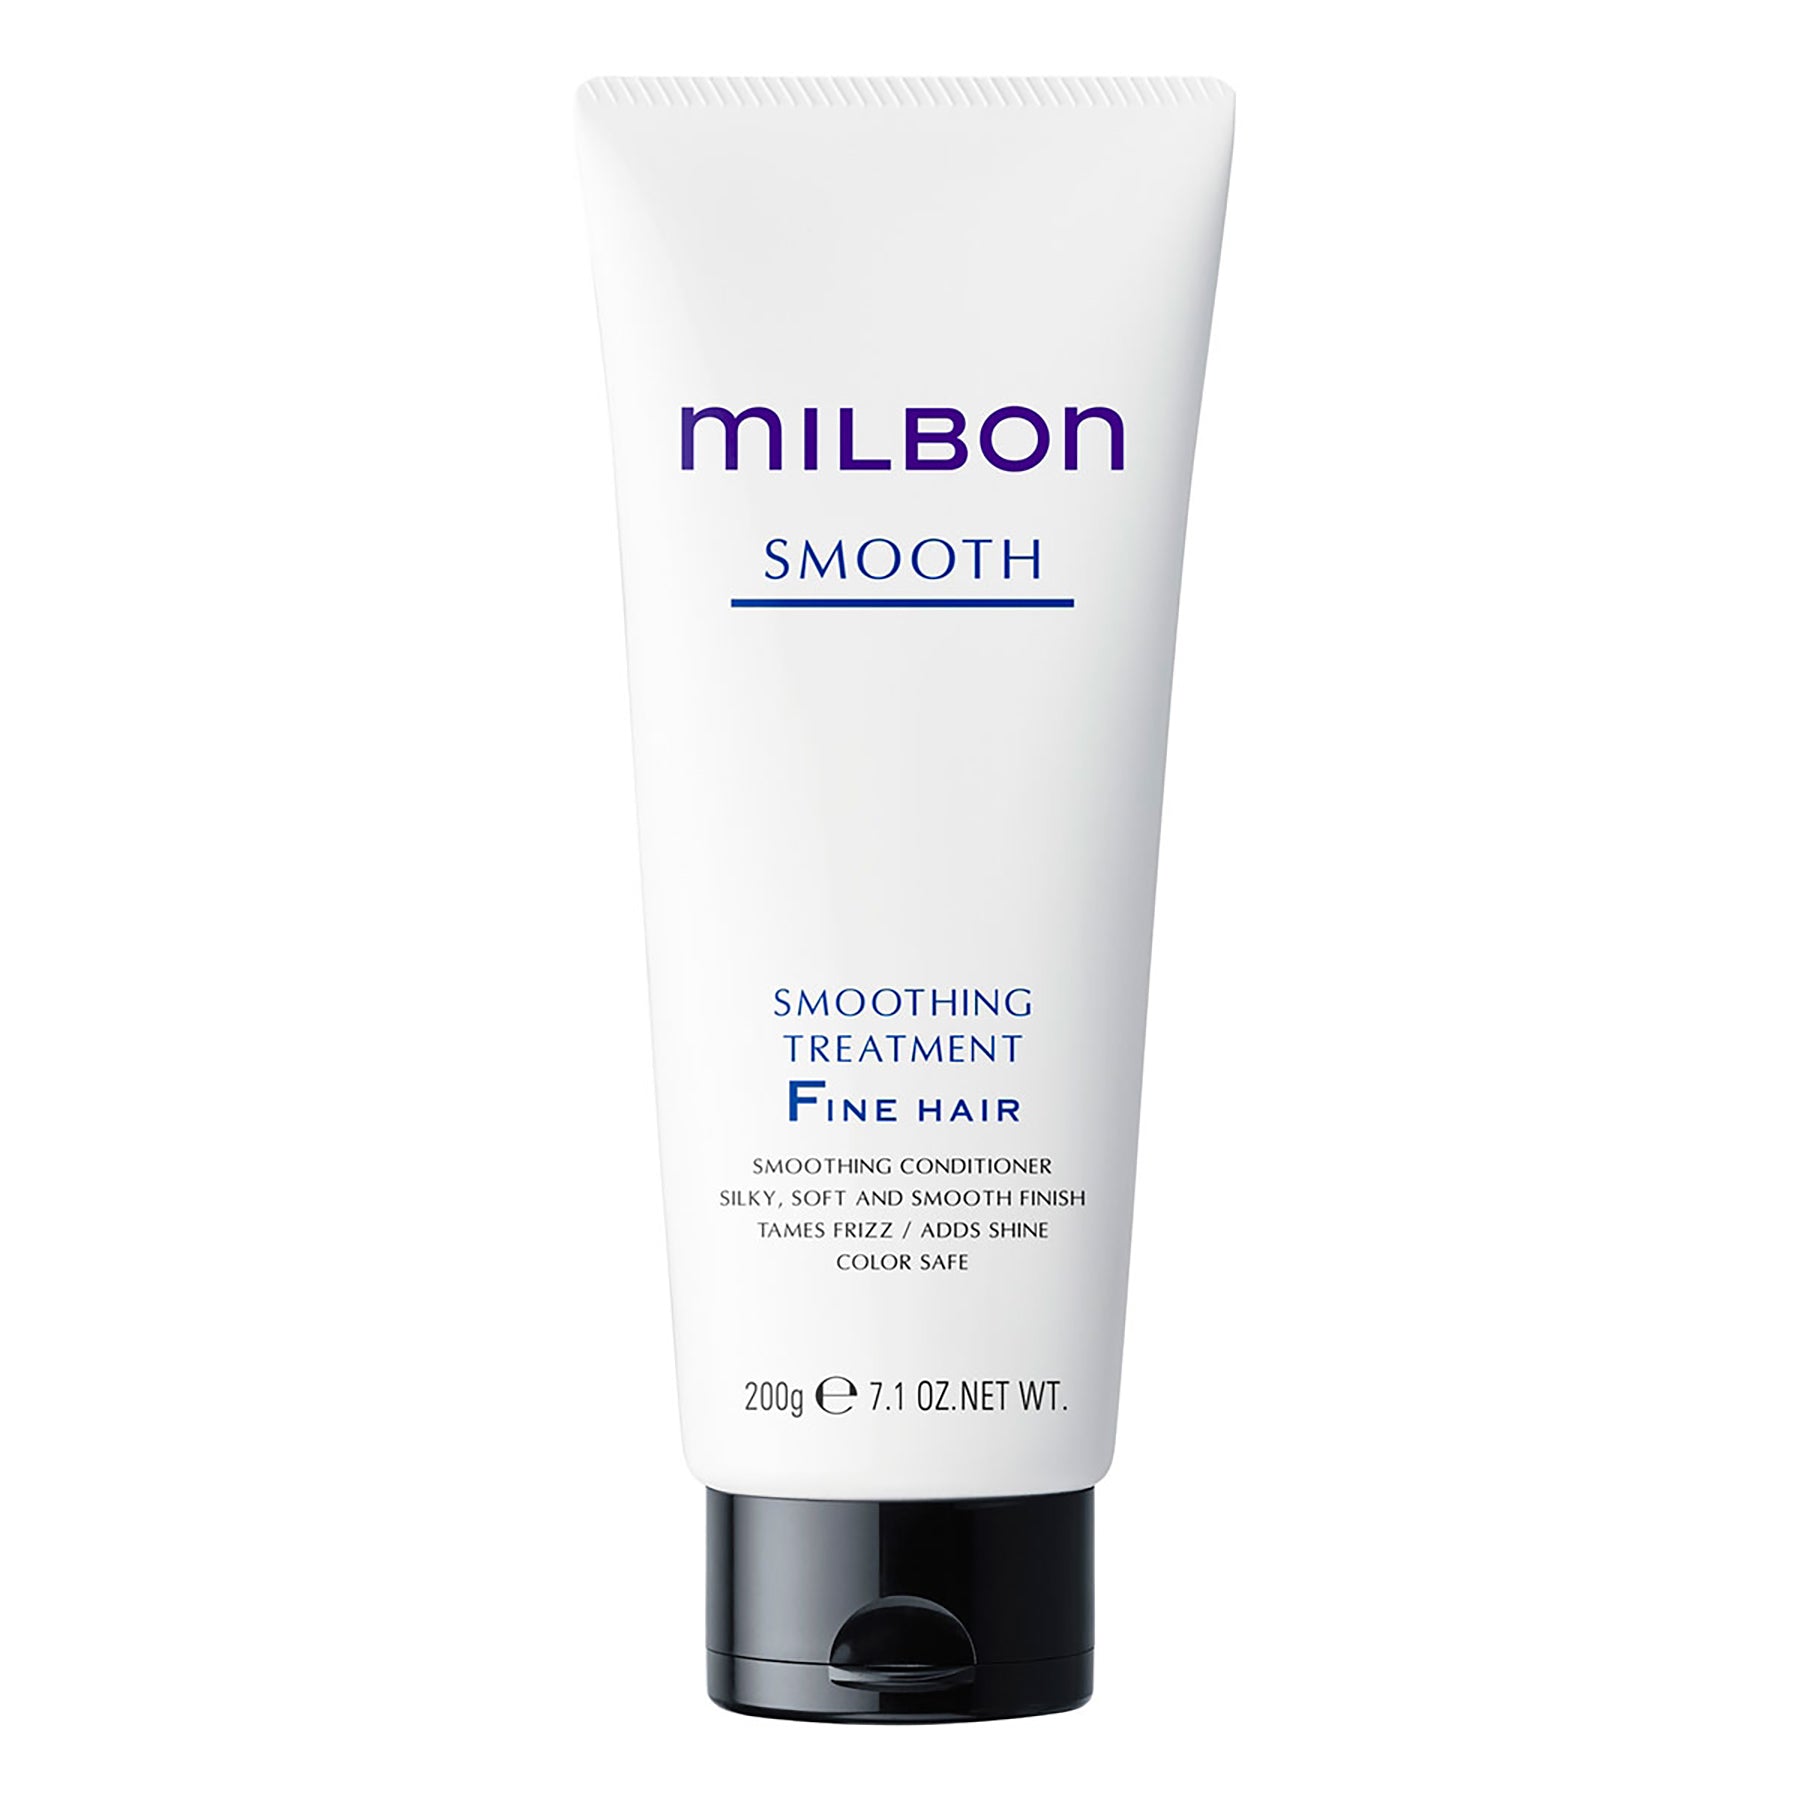 Smooth Smoothing Treatment Fine Hair